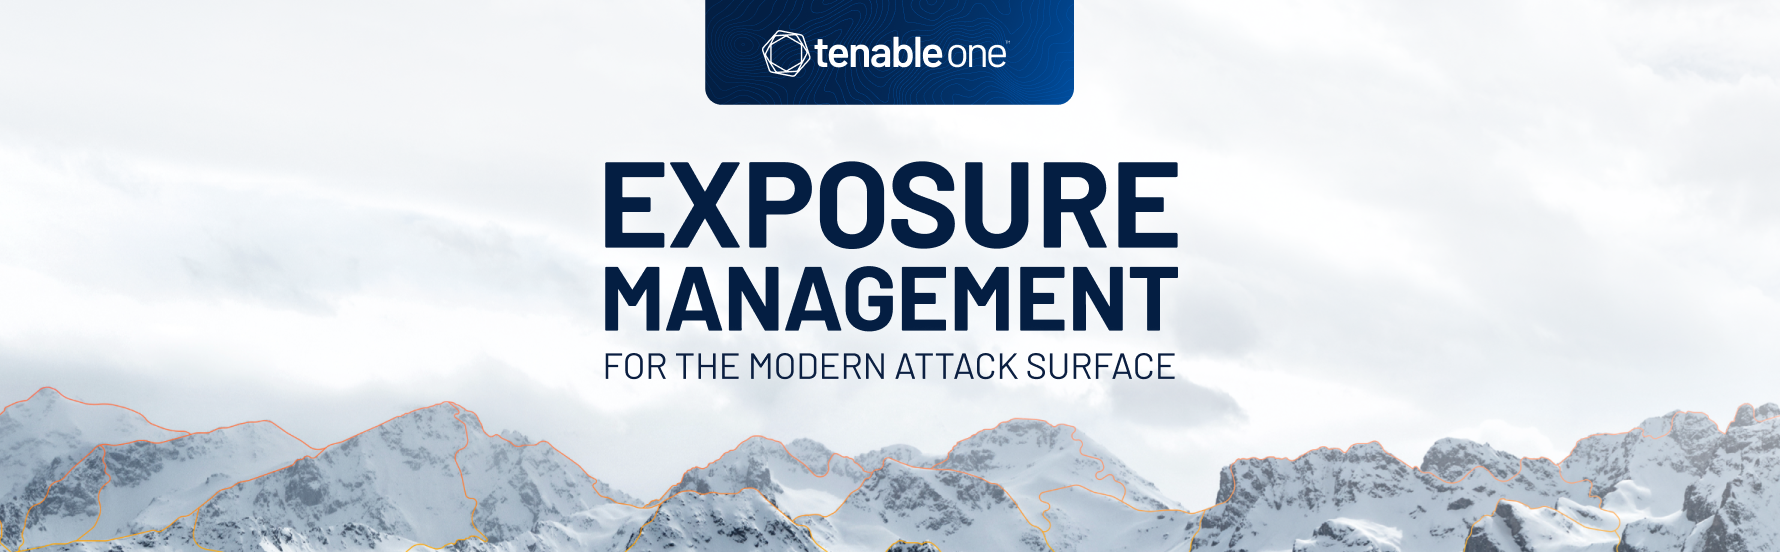 Cybersecurity: what are the benefits of using exposure management platform?